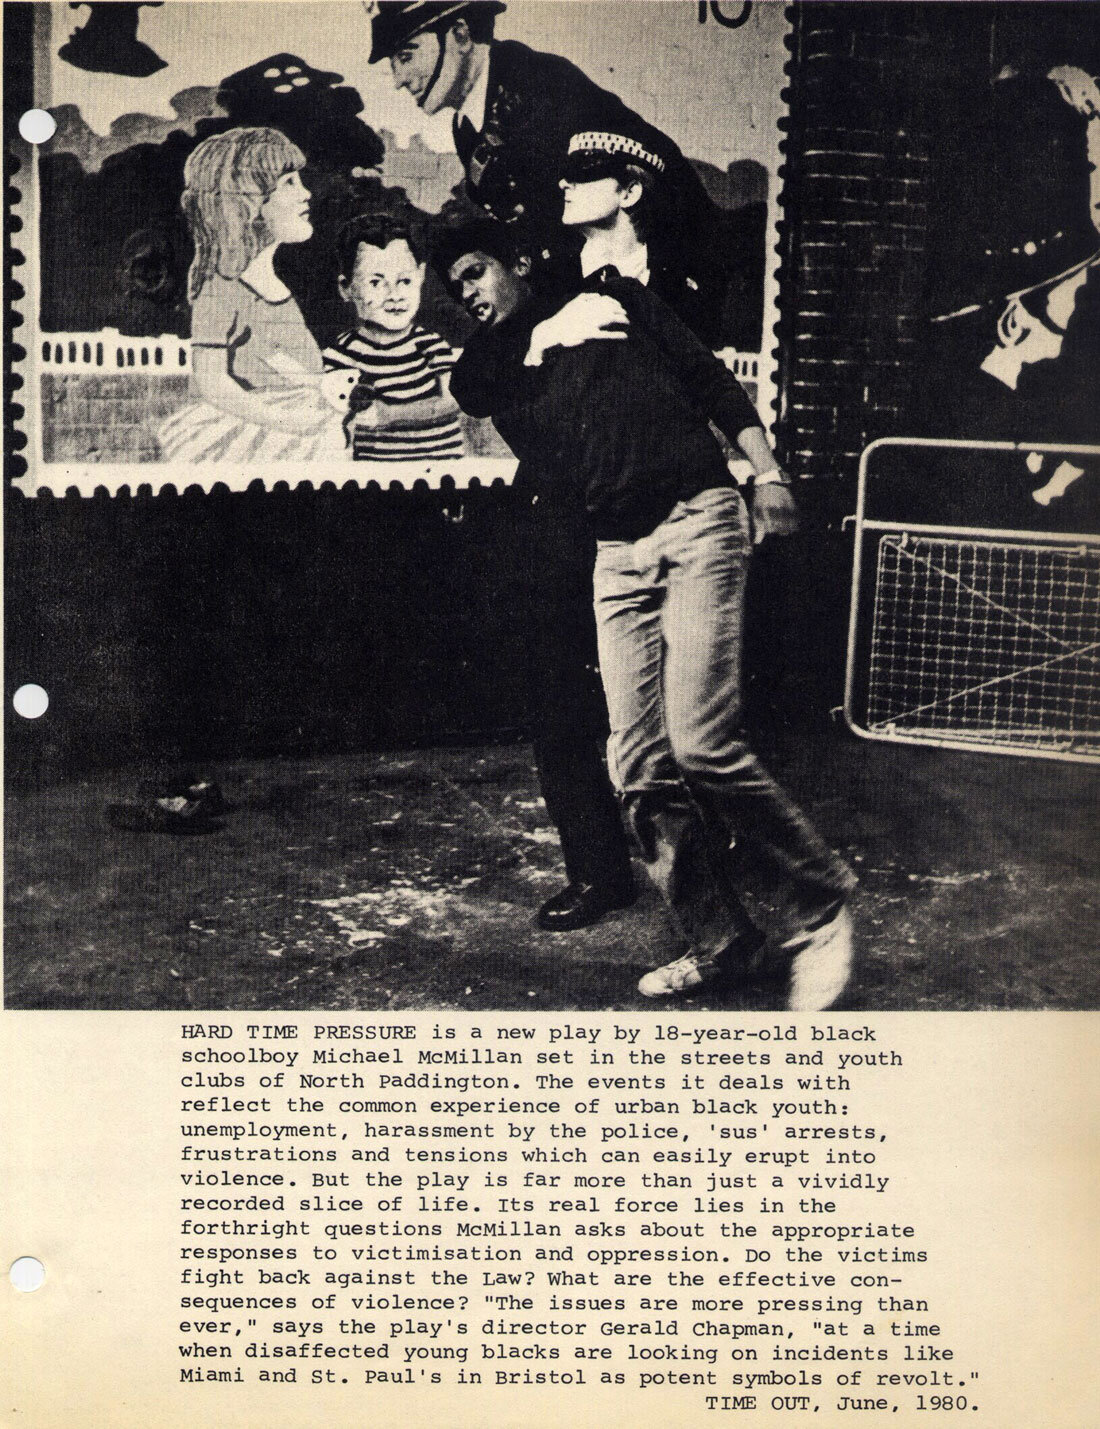 L to R: Junior Green, David Bland 'PC 'Bubble'. Extract from 'Pressure in Chelsea', Malcolm Hay, Time Out, June 1980.